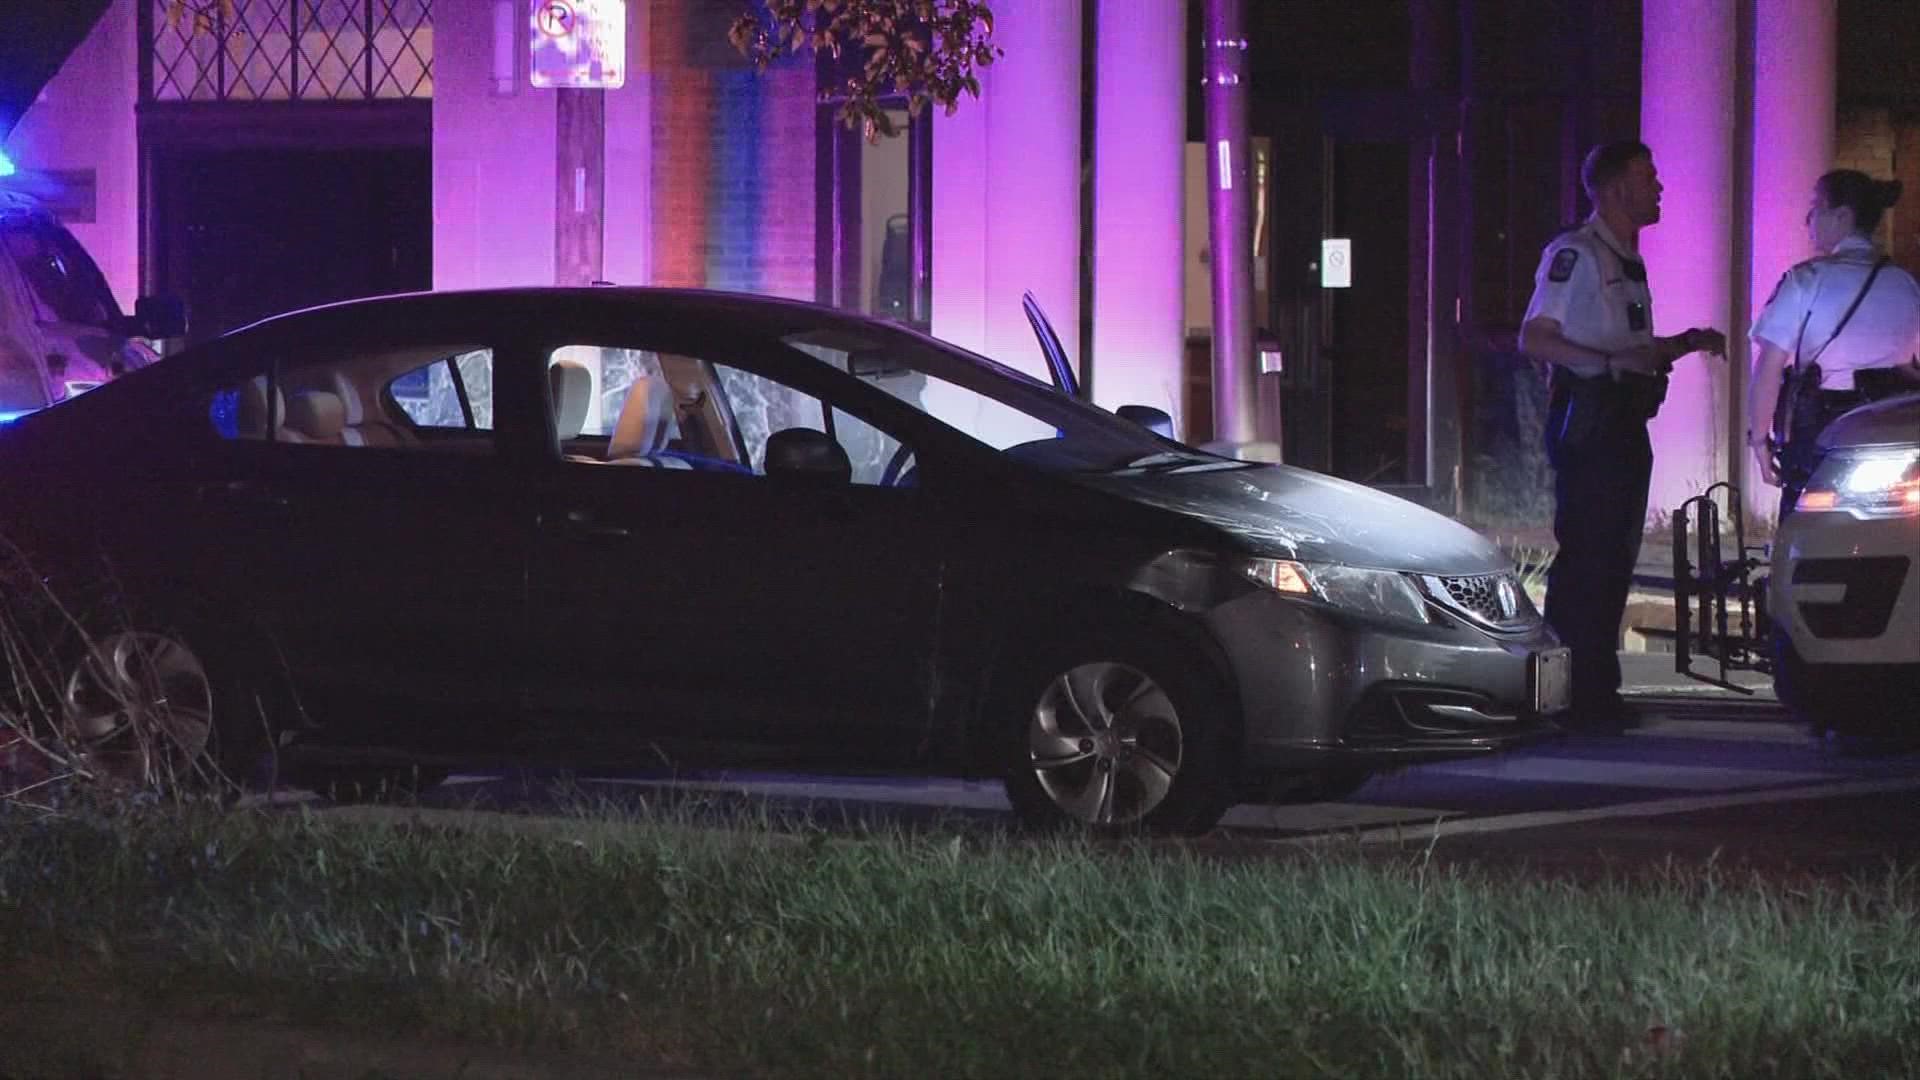 The suspect stole the vehicle in the 100 block of West 10th Street around 8:15 p.m., according to police.